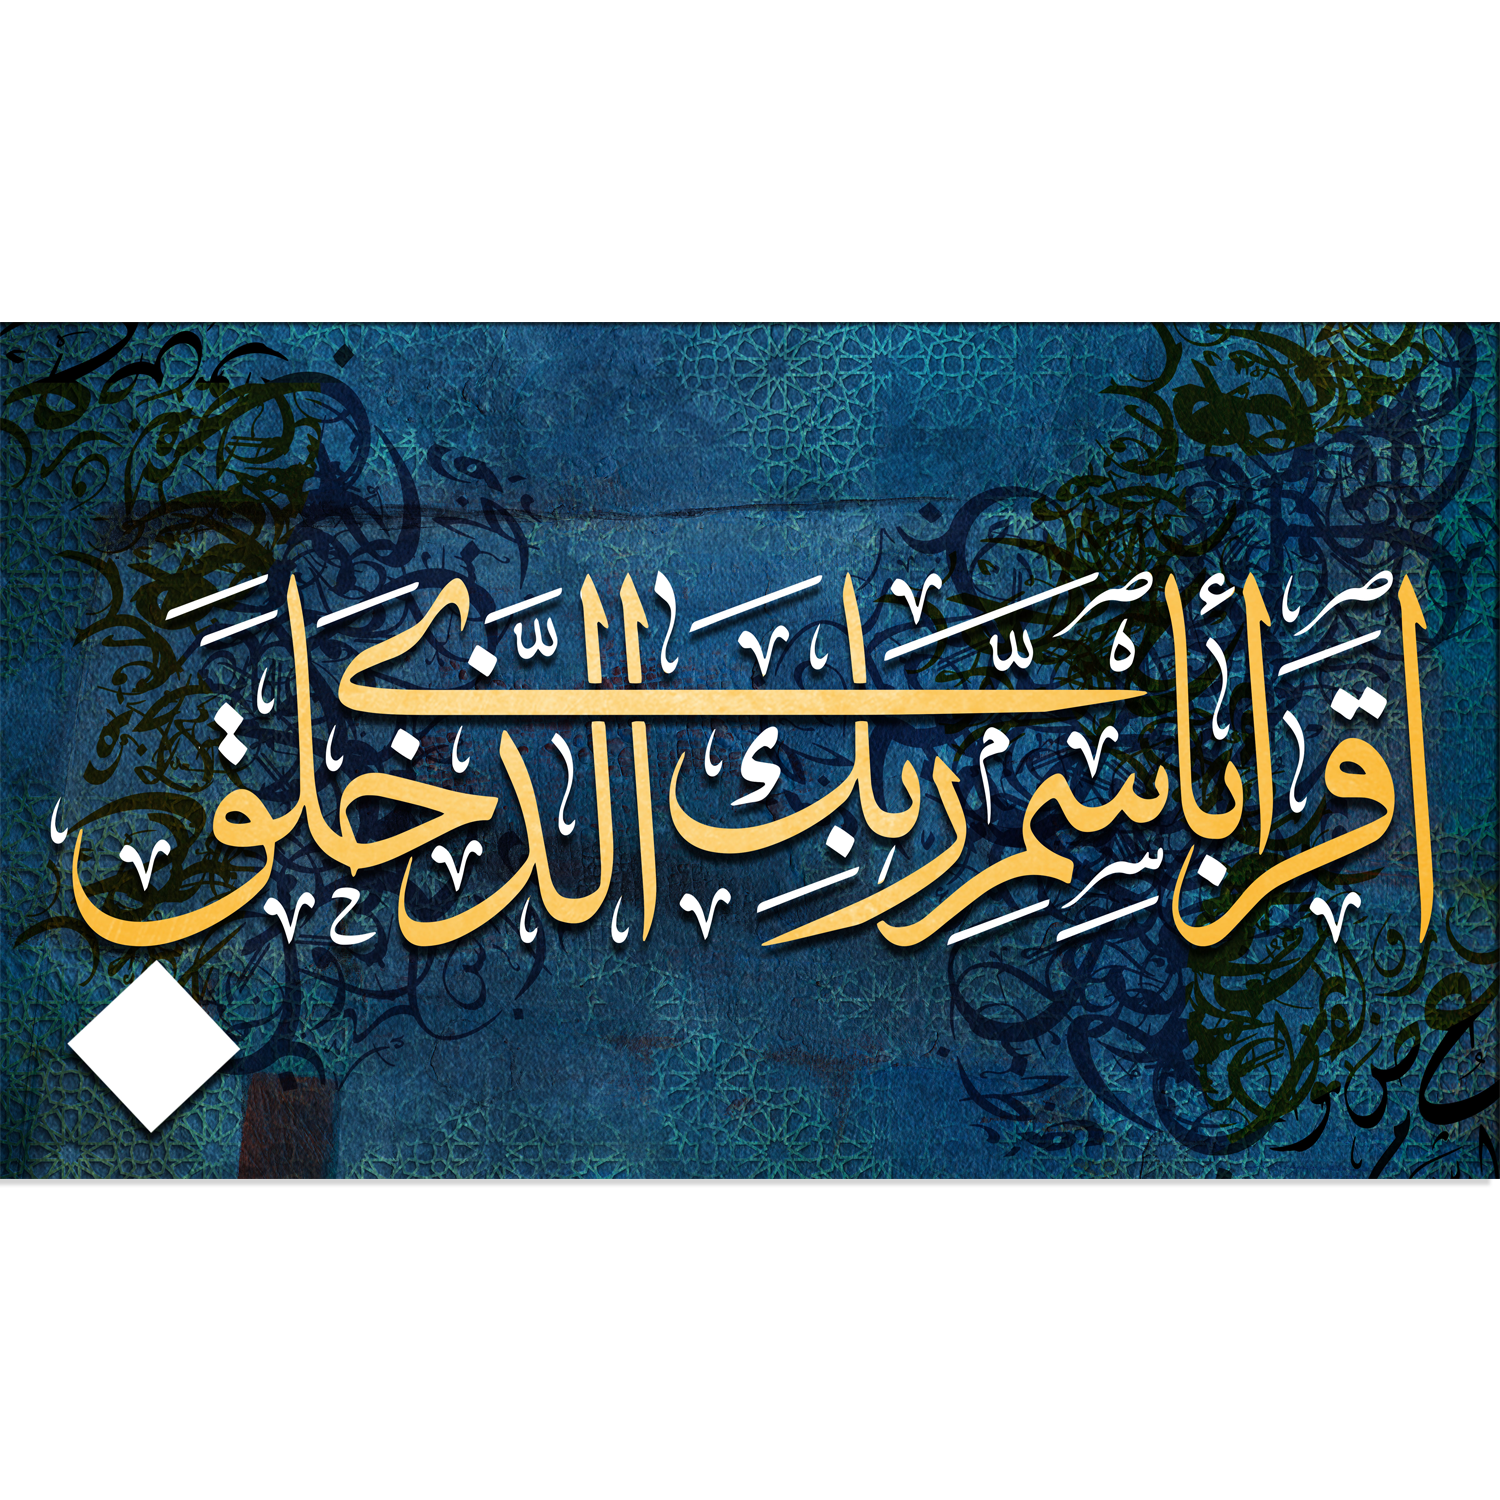 Islamic Words  Allah  Painting Canvas Wall Painting